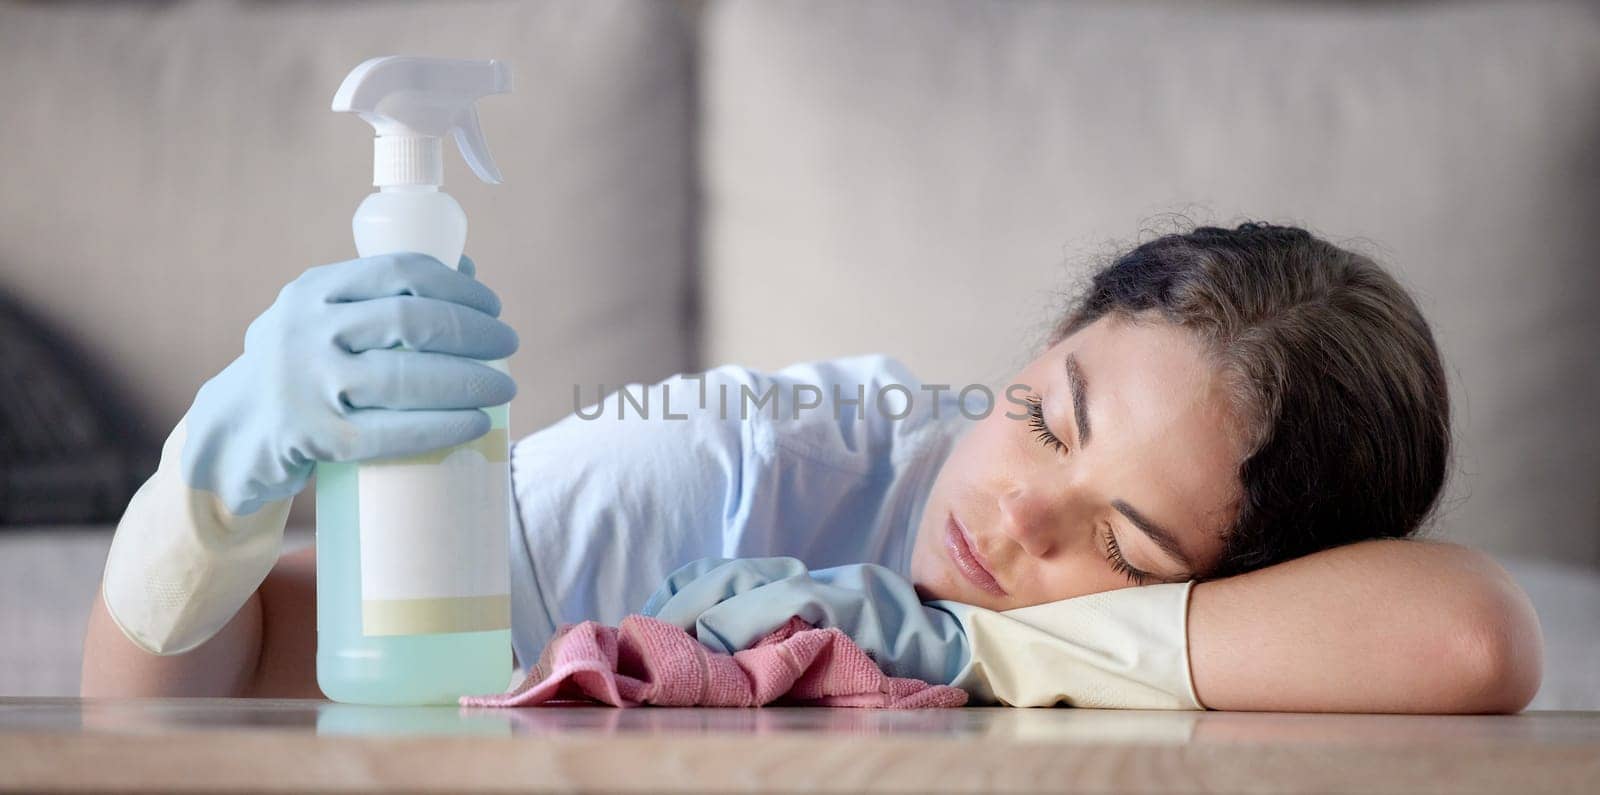 Tired woman, housekeeping and sleeping on table with detergent bottle by the living room sofa at home. Female exhausted from spring cleaning, burnout or nap after disinfection with sanitizer bottle.